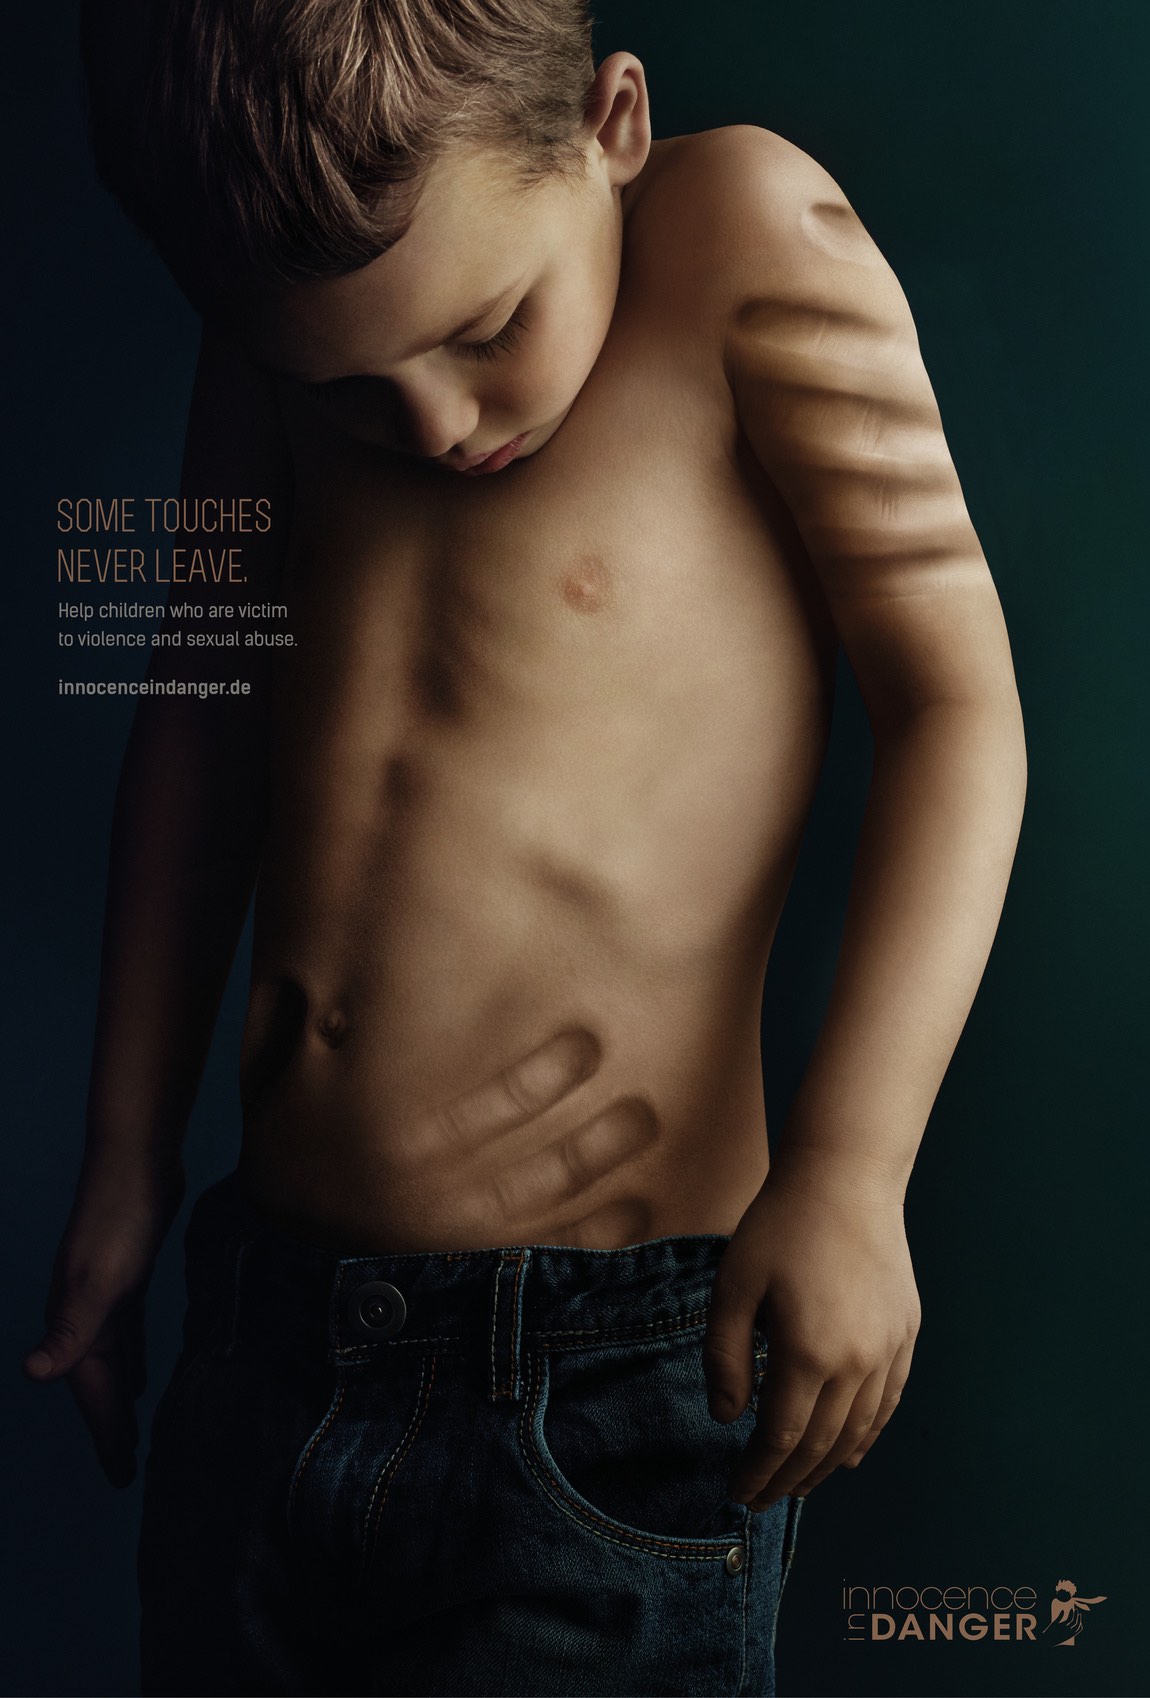 Innocence in Danger: Some touches never leave, Print ad by